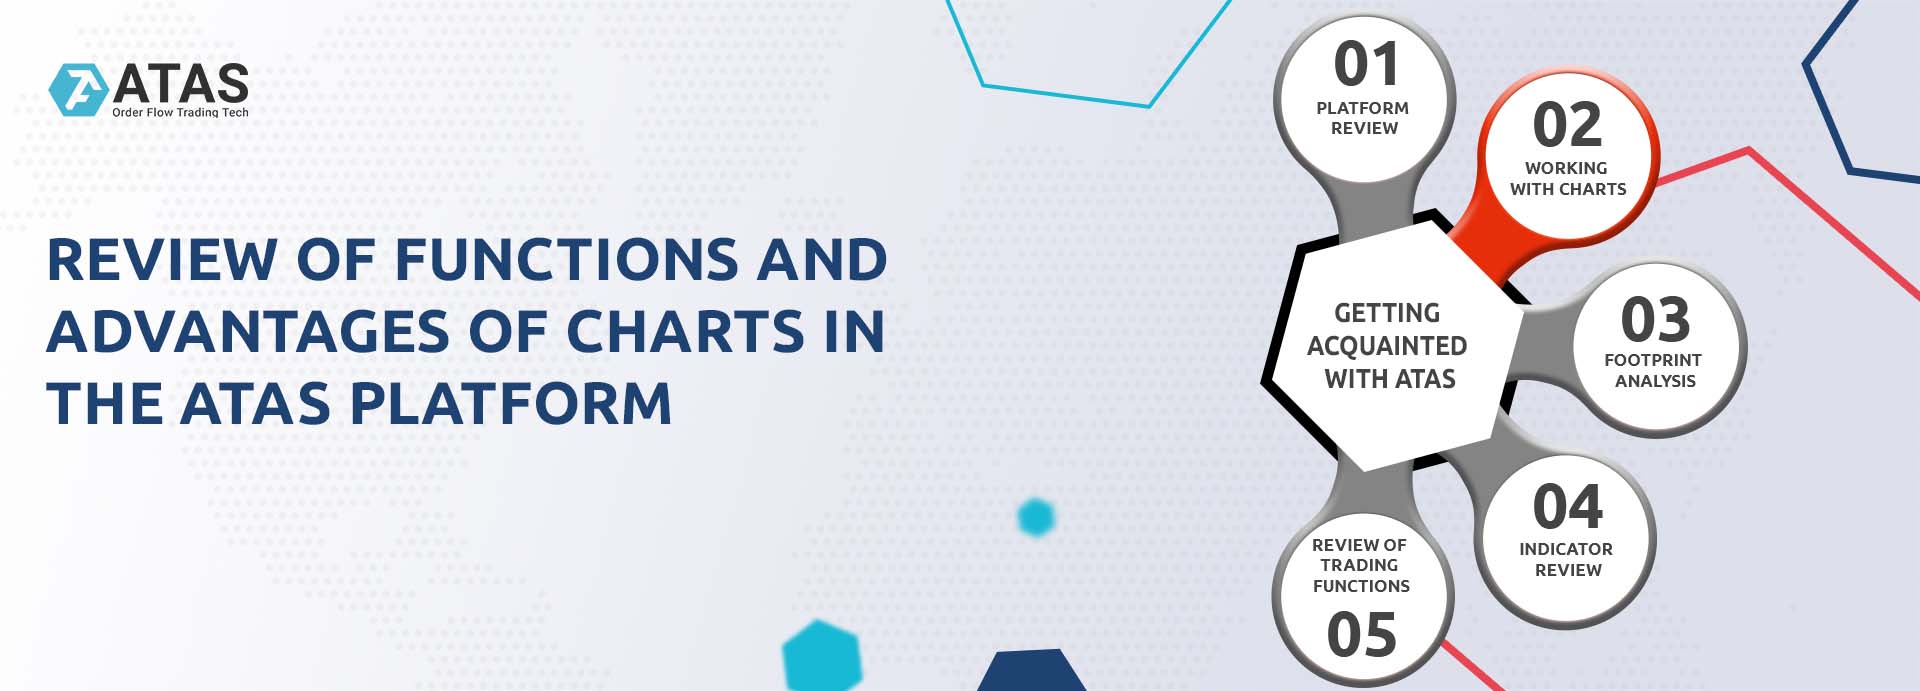 Review of functions and advantages of charts in the ATAS platform